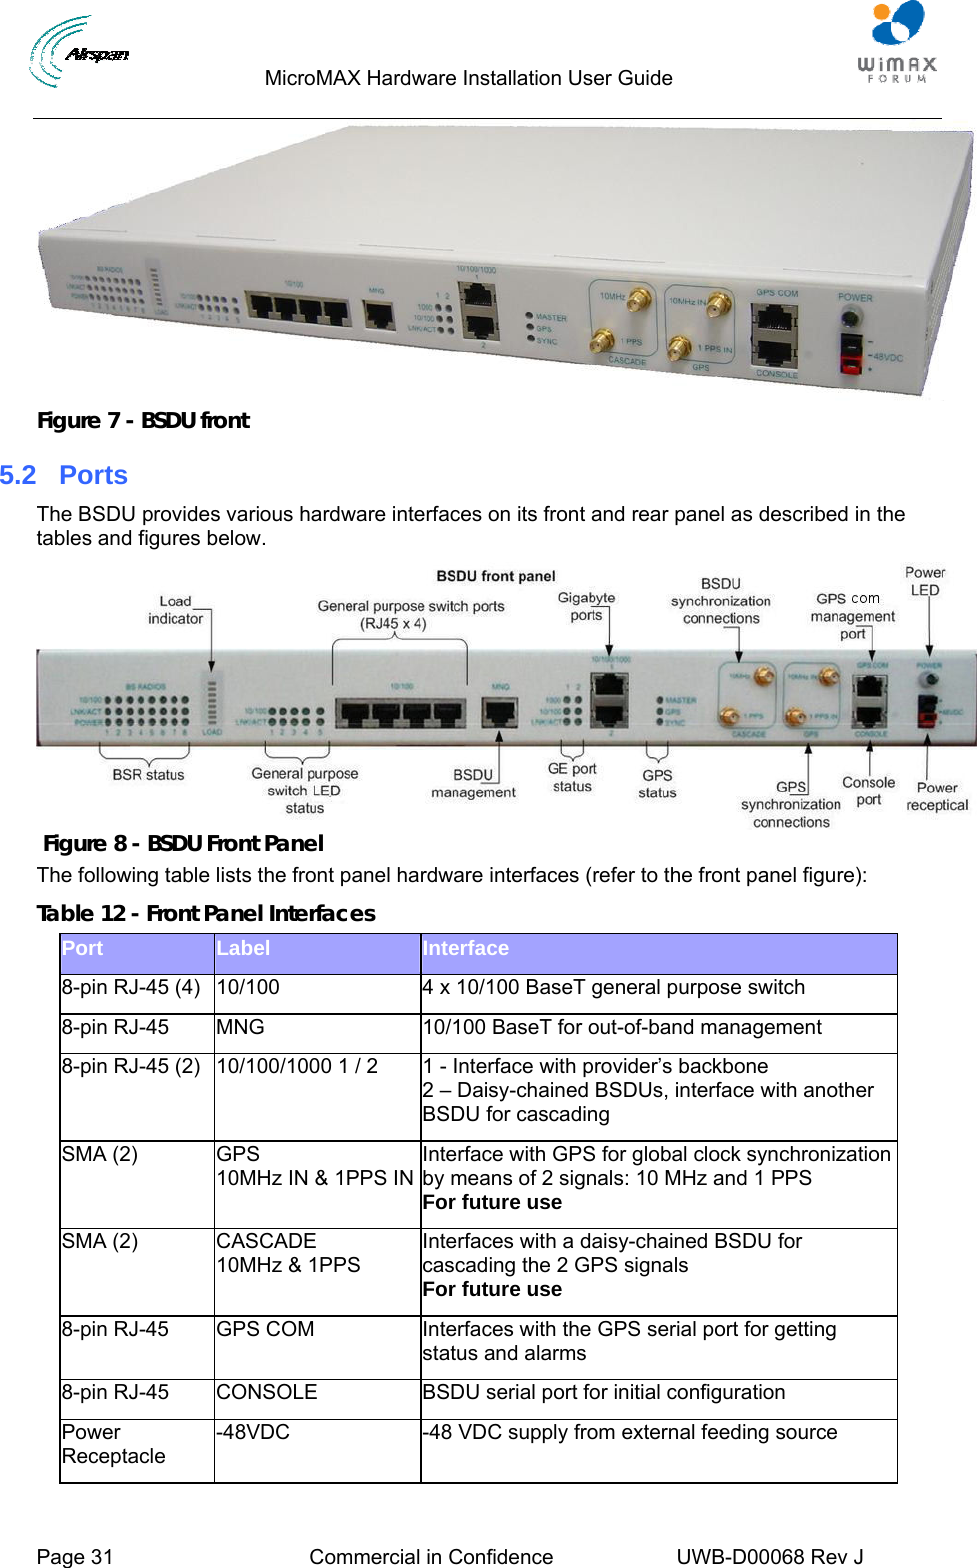                                  MicroMAX Hardware Installation User Guide     Page 31  Commercial in Confidence  UWB-D00068 Rev J    Figure 7 - BSDU front 5.2  Ports The BSDU provides various hardware interfaces on its front and rear panel as described in the tables and figures below.  Figure 8 - BSDU Front Panel The following table lists the front panel hardware interfaces (refer to the front panel figure): Table 12 - Front Panel Interfaces Port  Label  Interface 8-pin RJ-45 (4)  10/100  4 x 10/100 BaseT general purpose switch 8-pin RJ-45  MNG  10/100 BaseT for out-of-band management 8-pin RJ-45 (2)  10/100/1000 1 / 2  1 - Interface with provider’s backbone  2 – Daisy-chained BSDUs, interface with another BSDU for cascading SMA (2)  GPS 10MHz IN &amp; 1PPS INInterface with GPS for global clock synchronization by means of 2 signals: 10 MHz and 1 PPS For future use SMA (2)  CASCADE 10MHz &amp; 1PPS Interfaces with a daisy-chained BSDU for cascading the 2 GPS signals For future use 8-pin RJ-45  GPS COM  Interfaces with the GPS serial port for getting status and alarms 8-pin RJ-45  CONSOLE  BSDU serial port for initial configuration Power Receptacle -48VDC  -48 VDC supply from external feeding source  